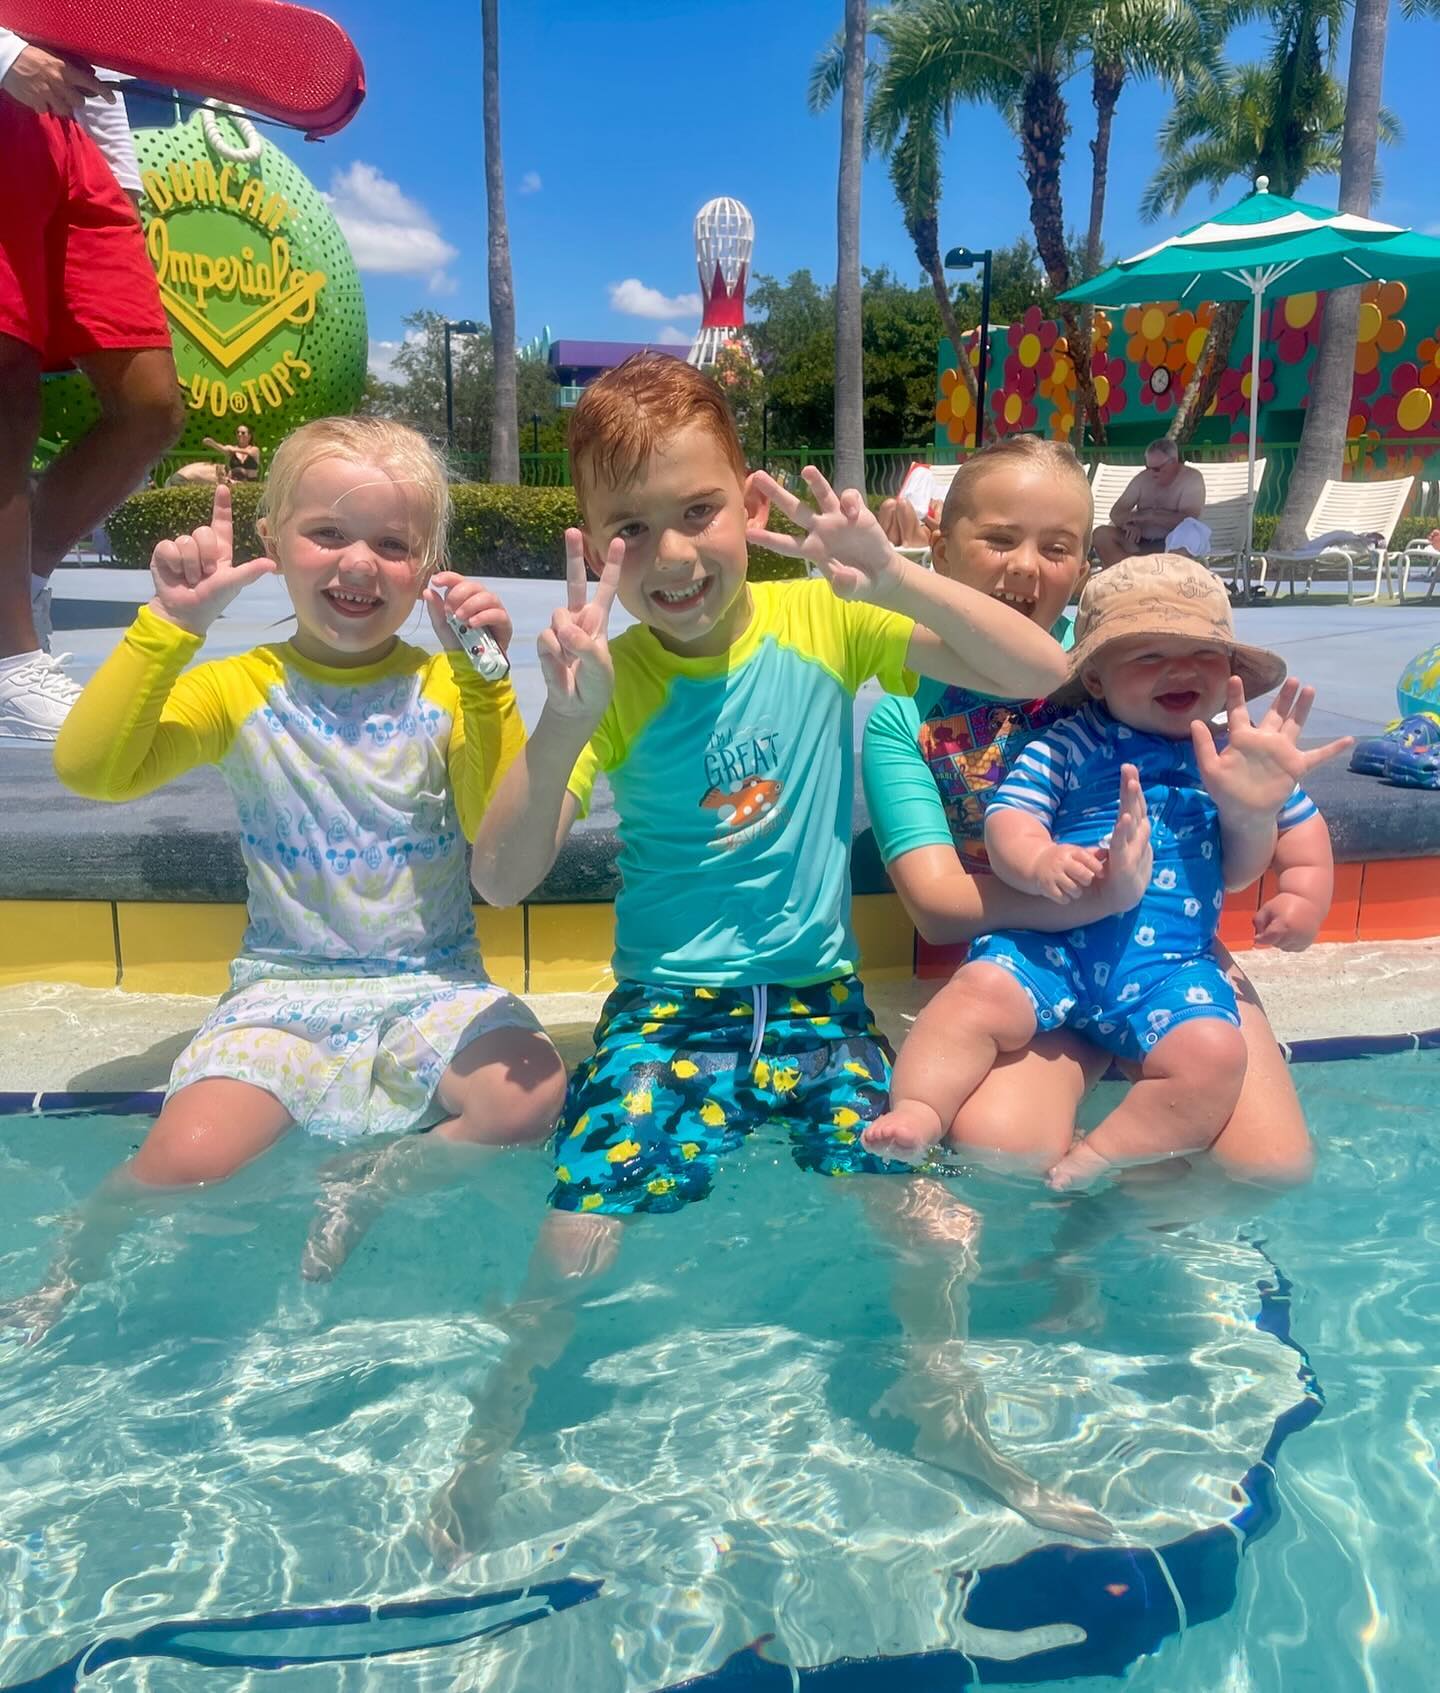 Fun times with friends and family at the Pop Century Resort in Disney World! Lukas just loved spending time here for his 7th birthday. 🎂 
#amputeelife #amputee #popcentury #hotels #resort #disney #disneyresort #travel